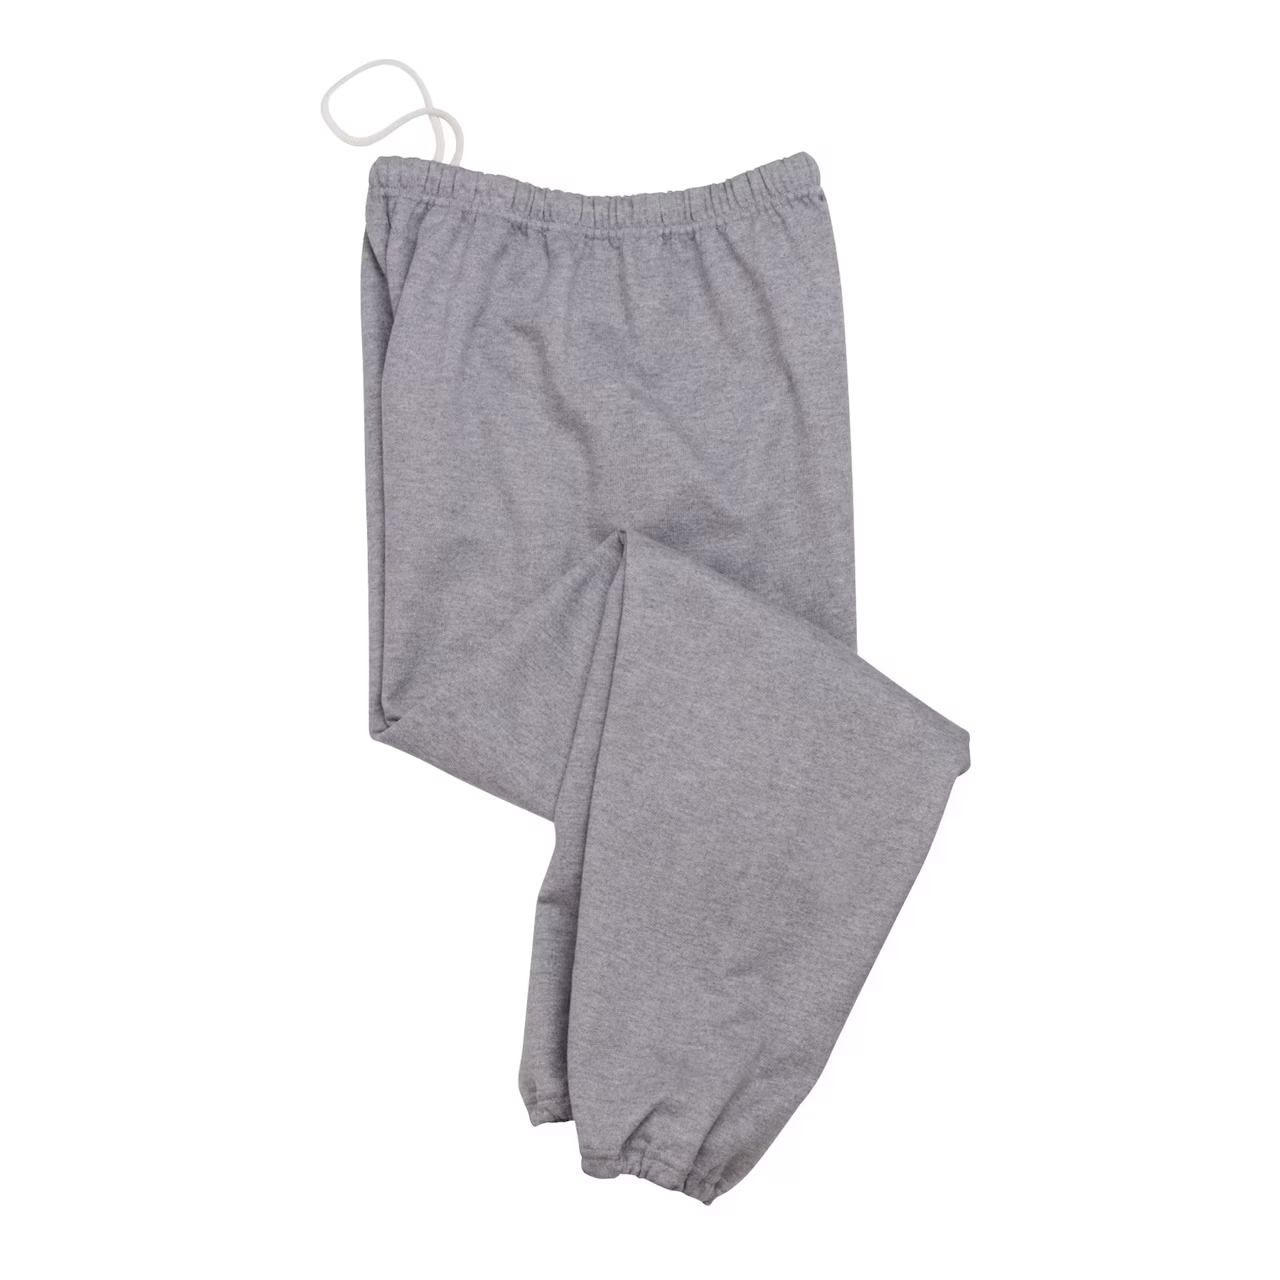 You are currently viewing Jerzees 973 Adult: Best 2023 NuBlend Fleece Sweatpants Cotton/Poly